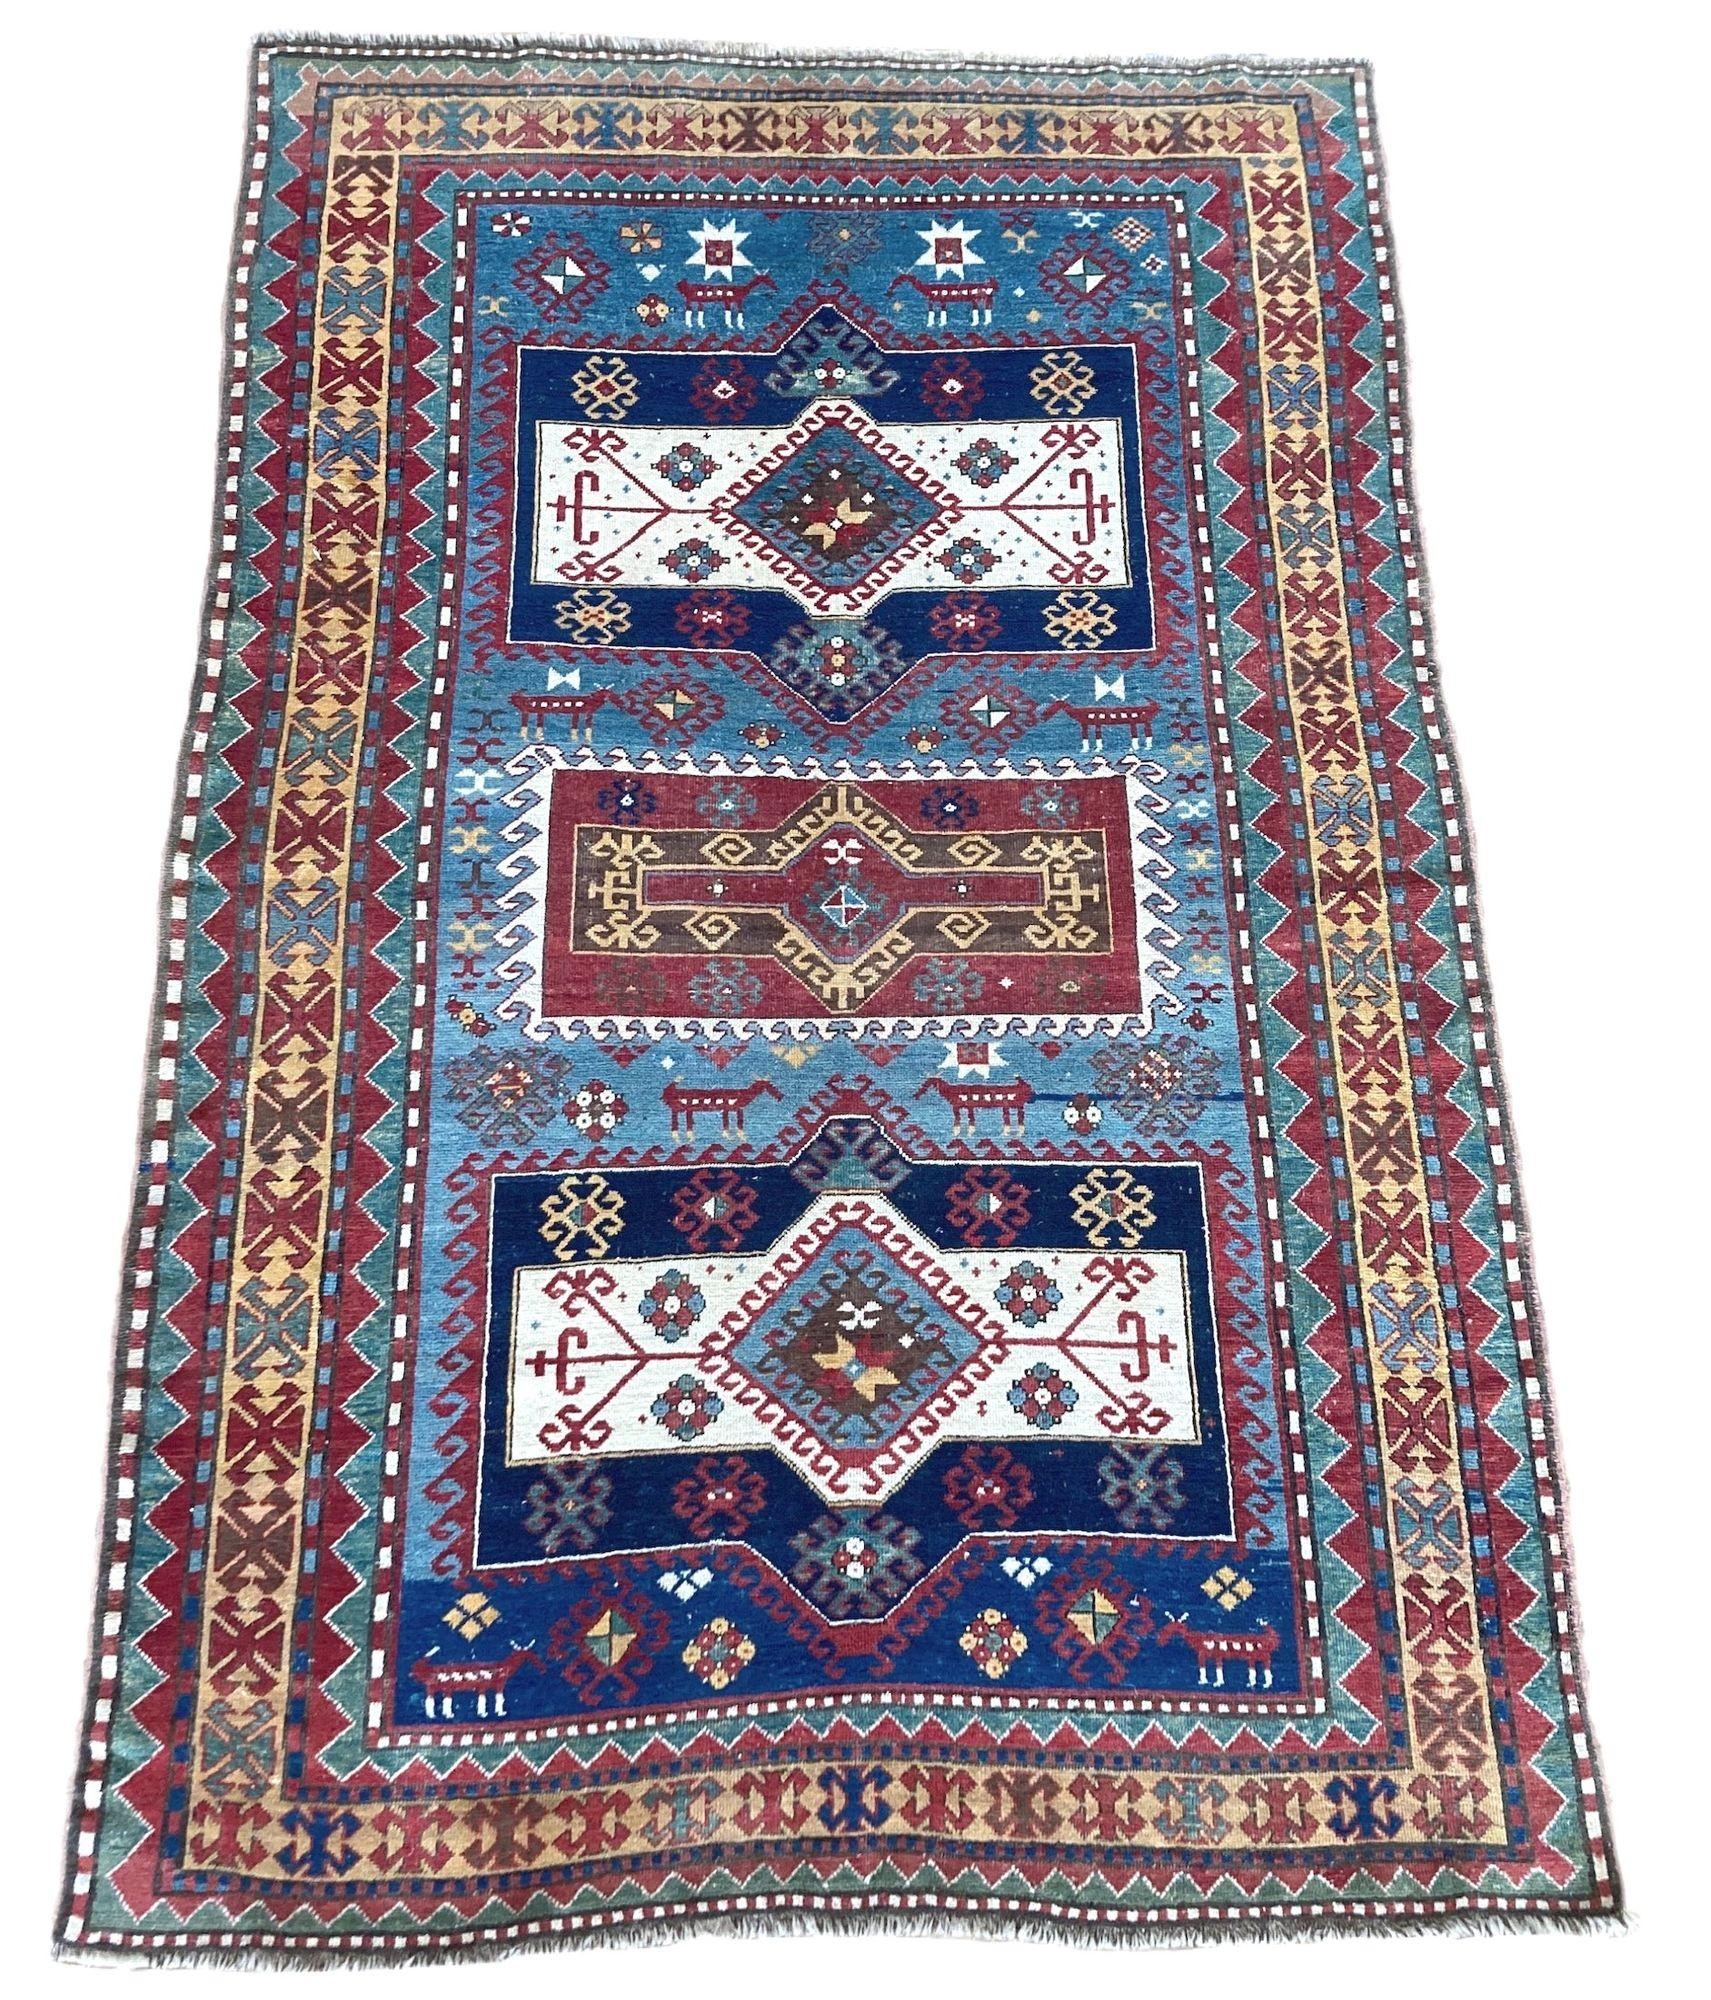 A stunning antique Kazak rug, handwoven in the Caucasus mountains of central Asia circa 1900. The design features 3 striking medallions on an indigo field and unusual gold border. Note the interesting animal figures throughout the field. Highly